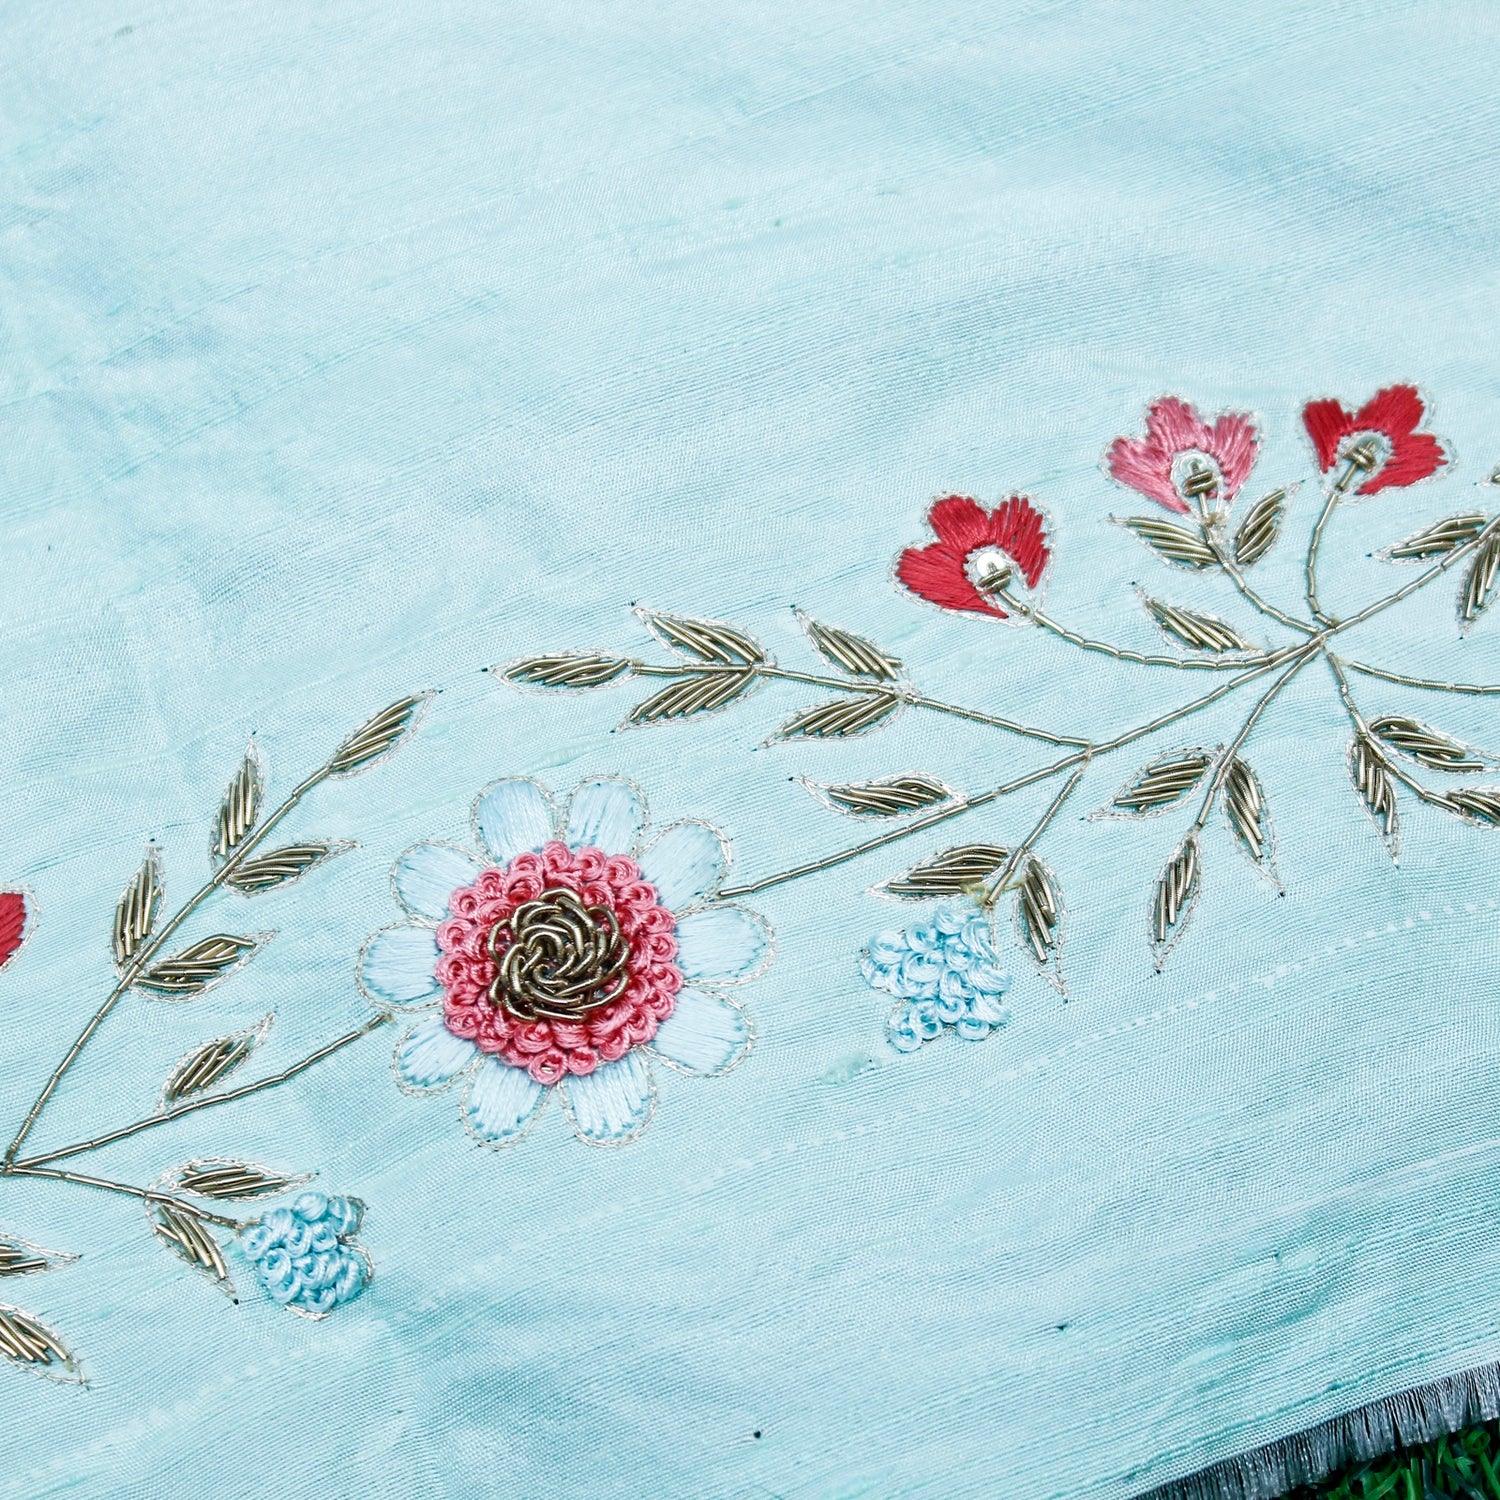 Simple Blouses in Different Designs Like Embroidery Flower Motifs, Zardozi  Work -  Hong Kong